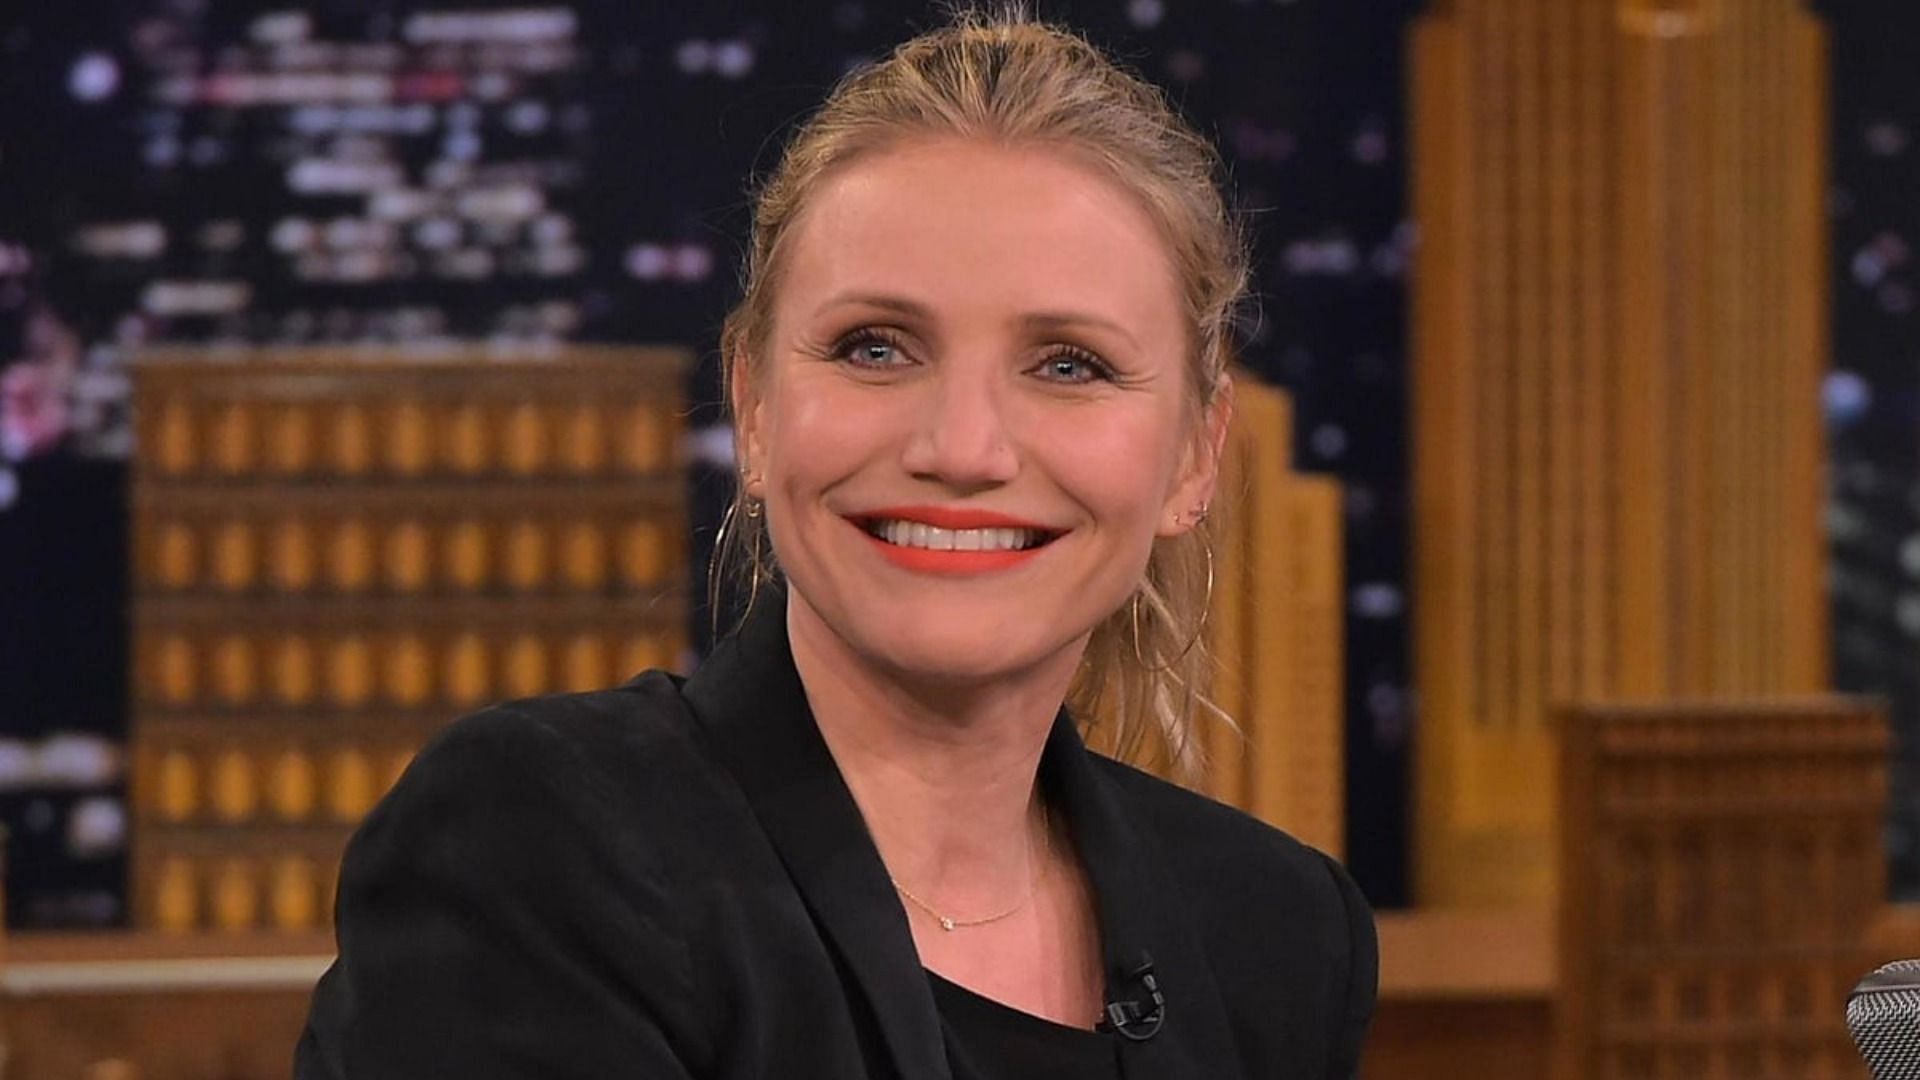 Cameron Diaz confessed she has stopped thinking about her appearance ever since she has left the entertainment industry (Image via Getty Images/ Theo Wargo)